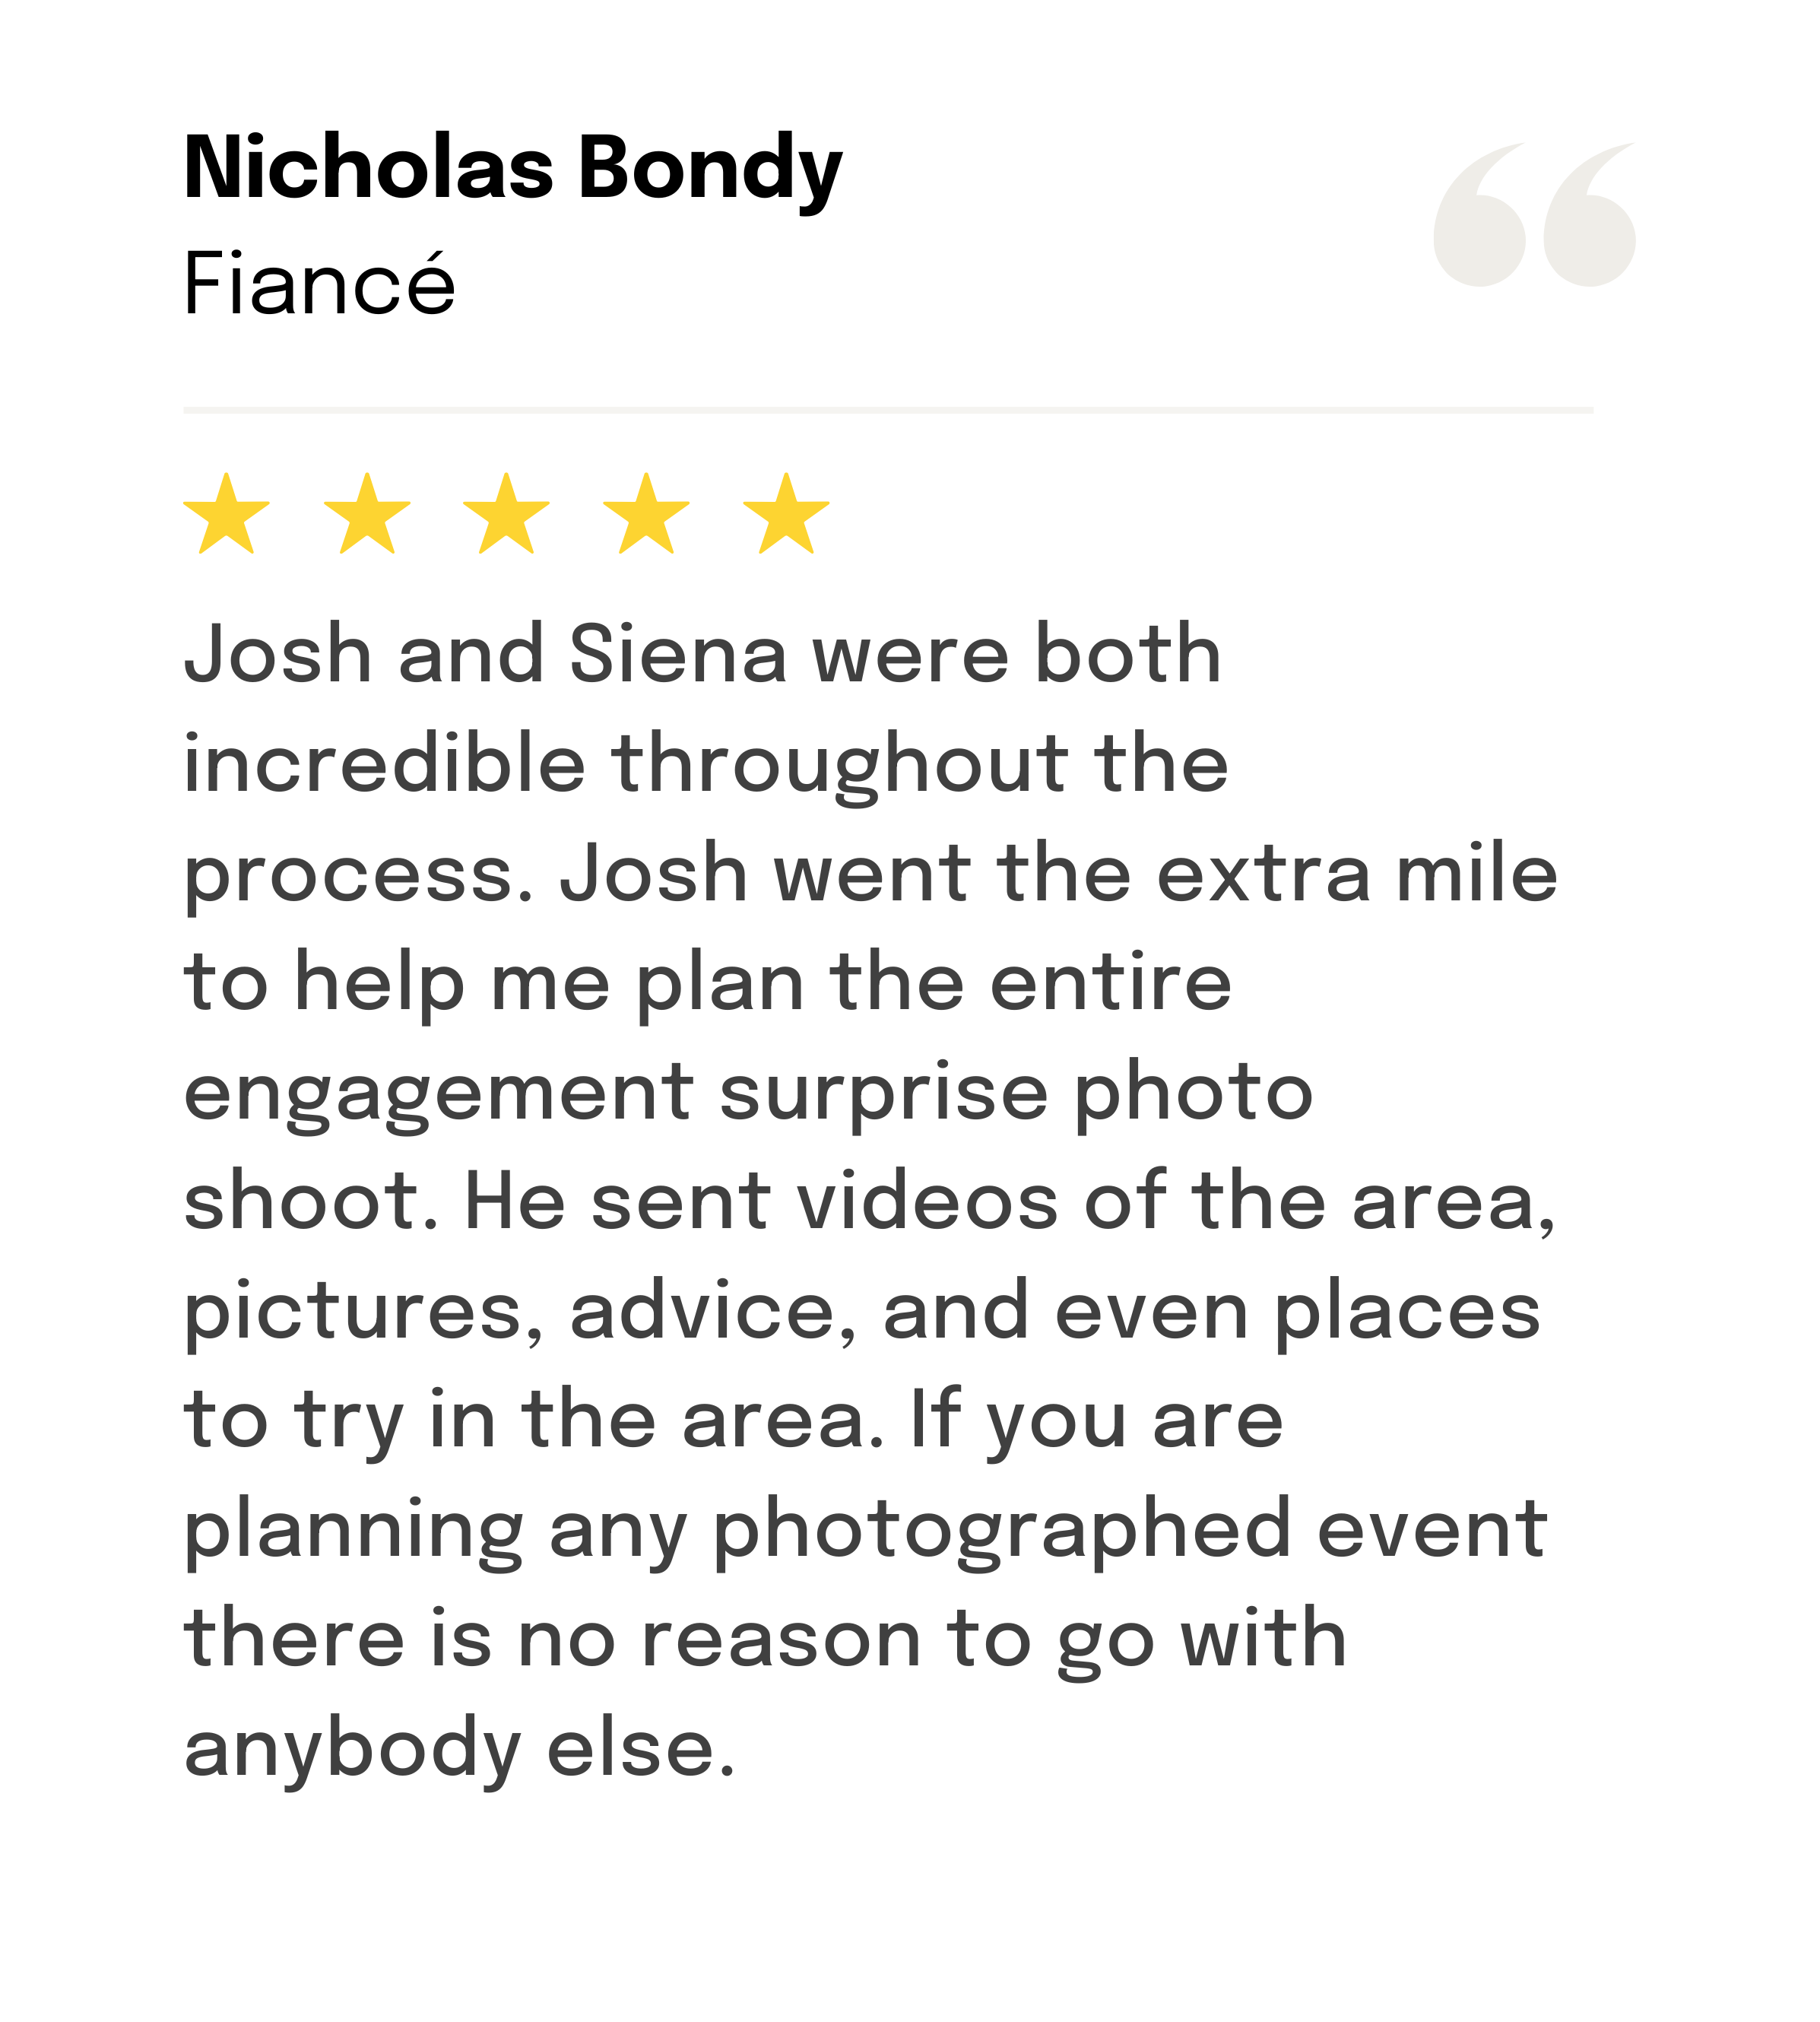 Nicholas writes a 5-star review to Wandr North for their proposal photography and videography services.